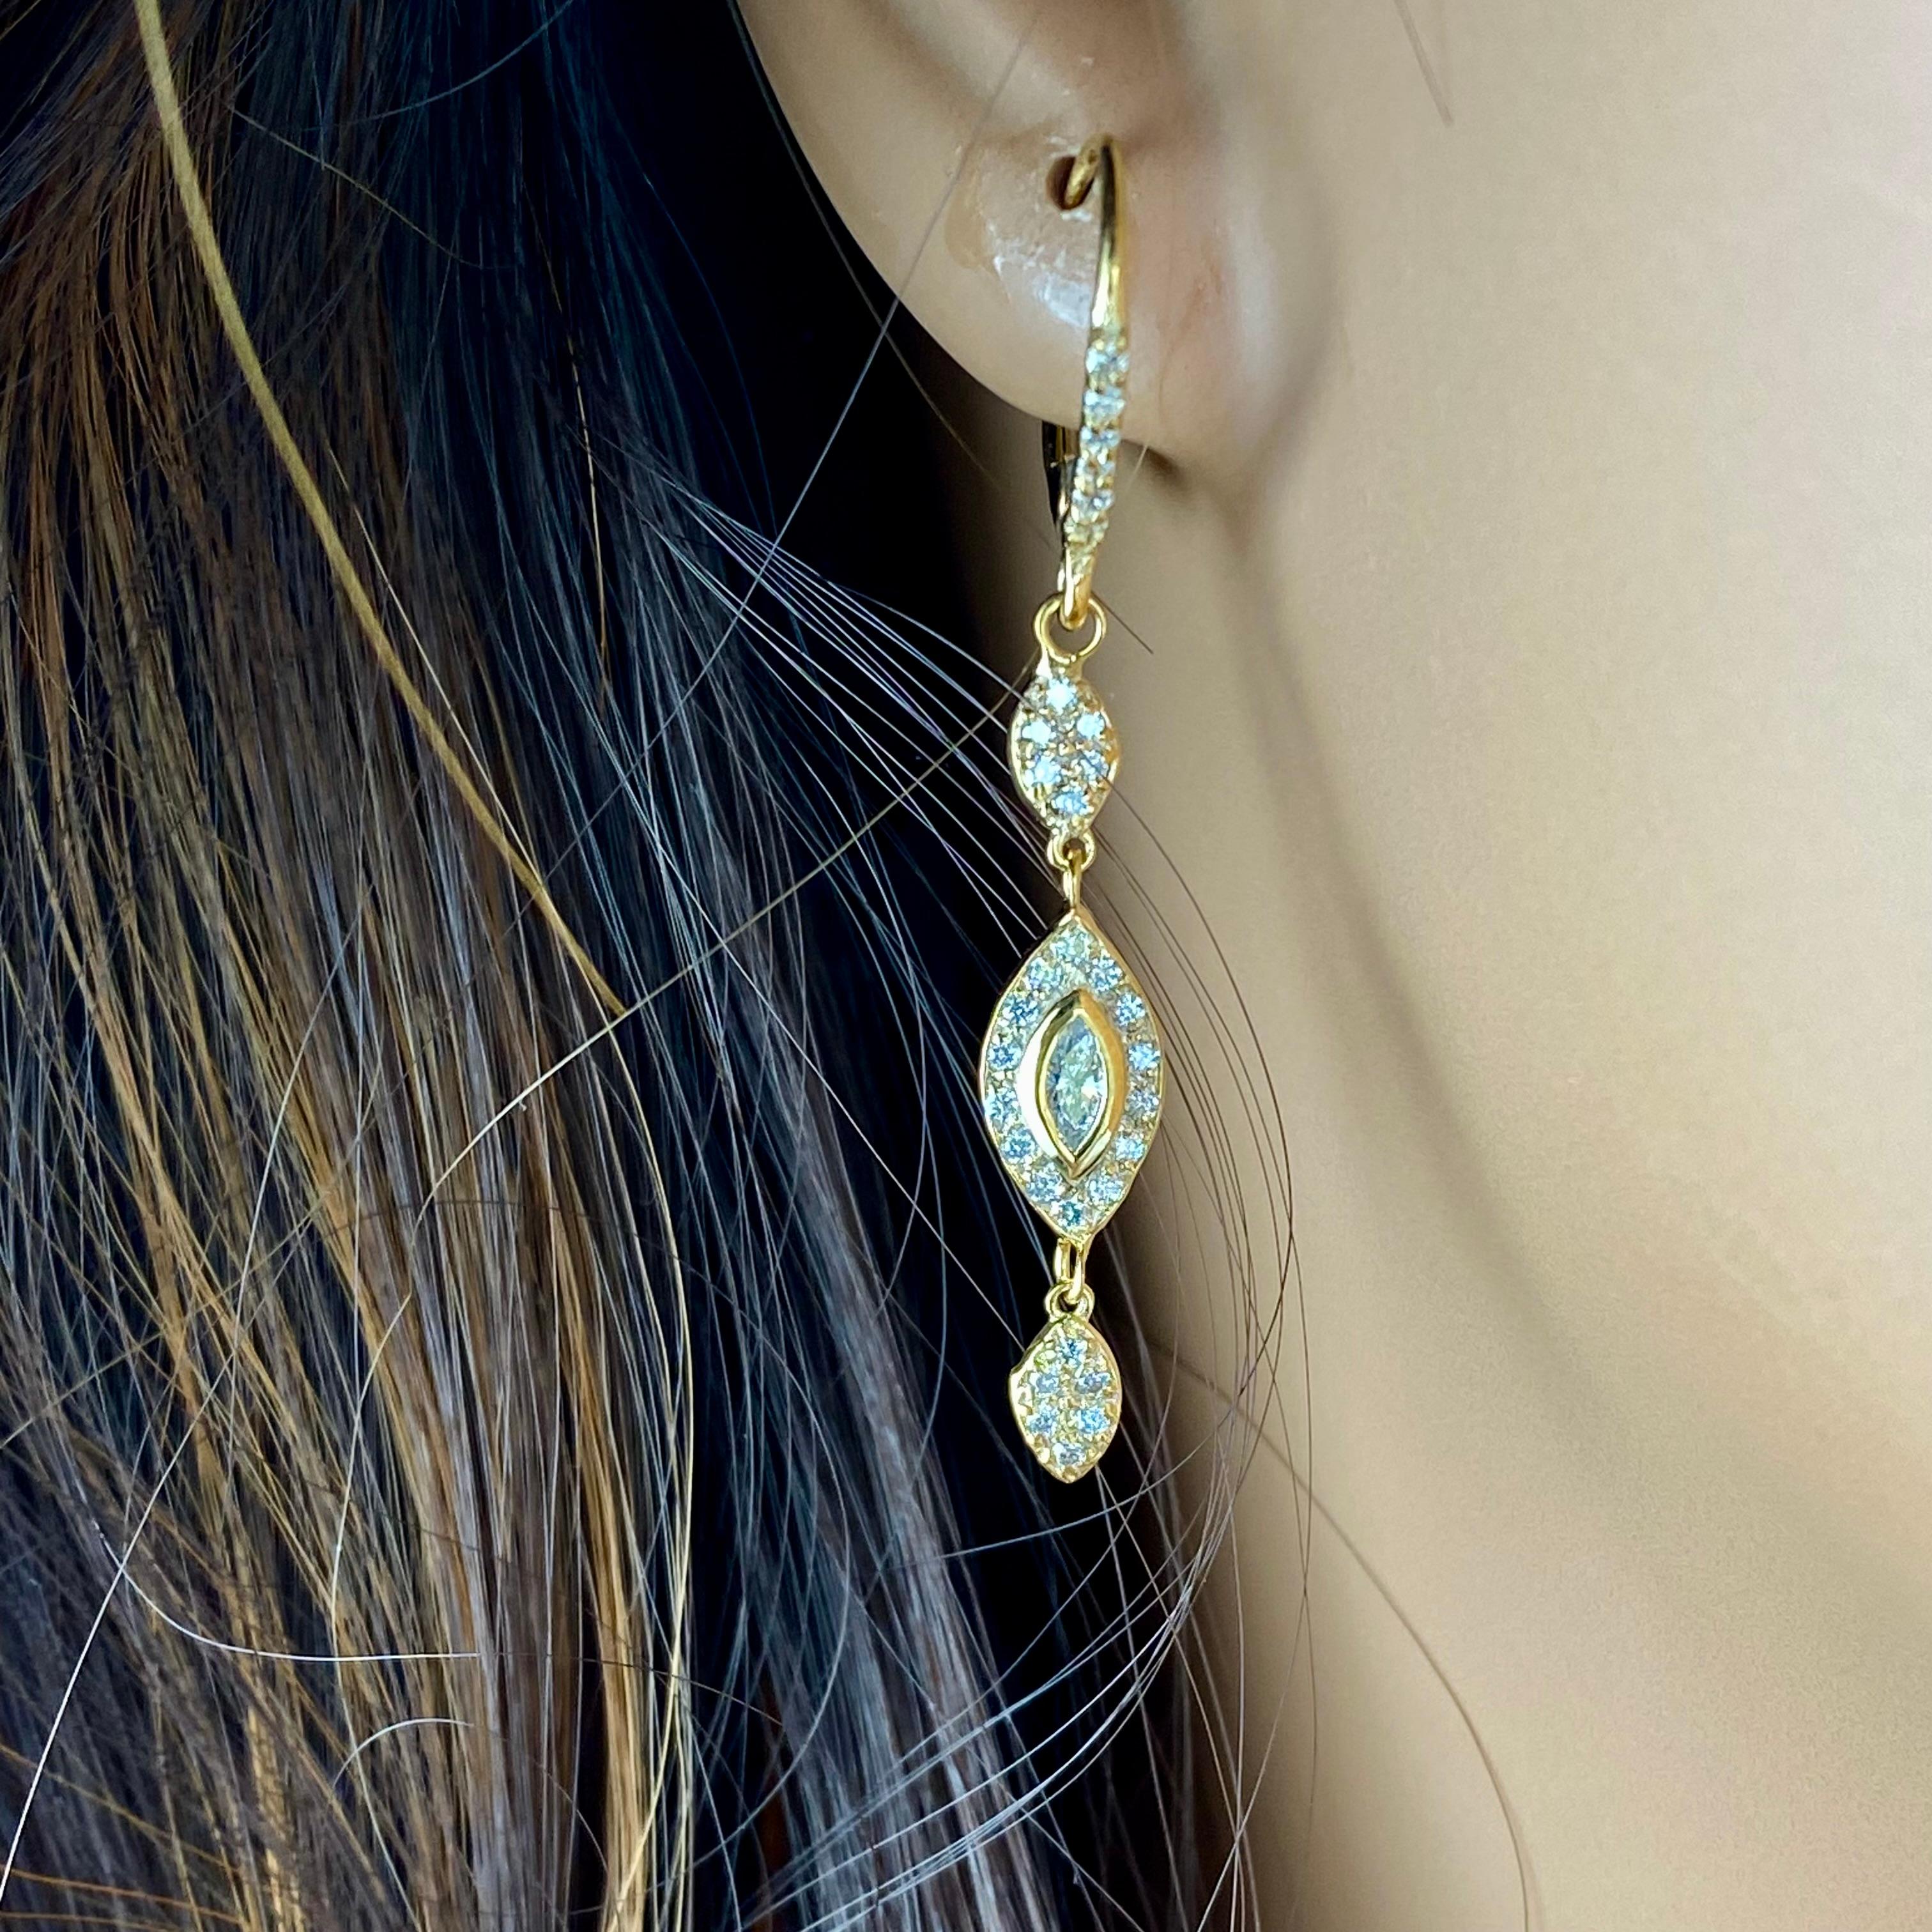 Introducing our exquisite 18 karat yellow gold hoop diamond earrings, designed to captivate with their timeless elegance and stunning craftsmanship. These earrings feature two magnificent marquise-cut diamonds, each weighing 0.25 carats, gracefully